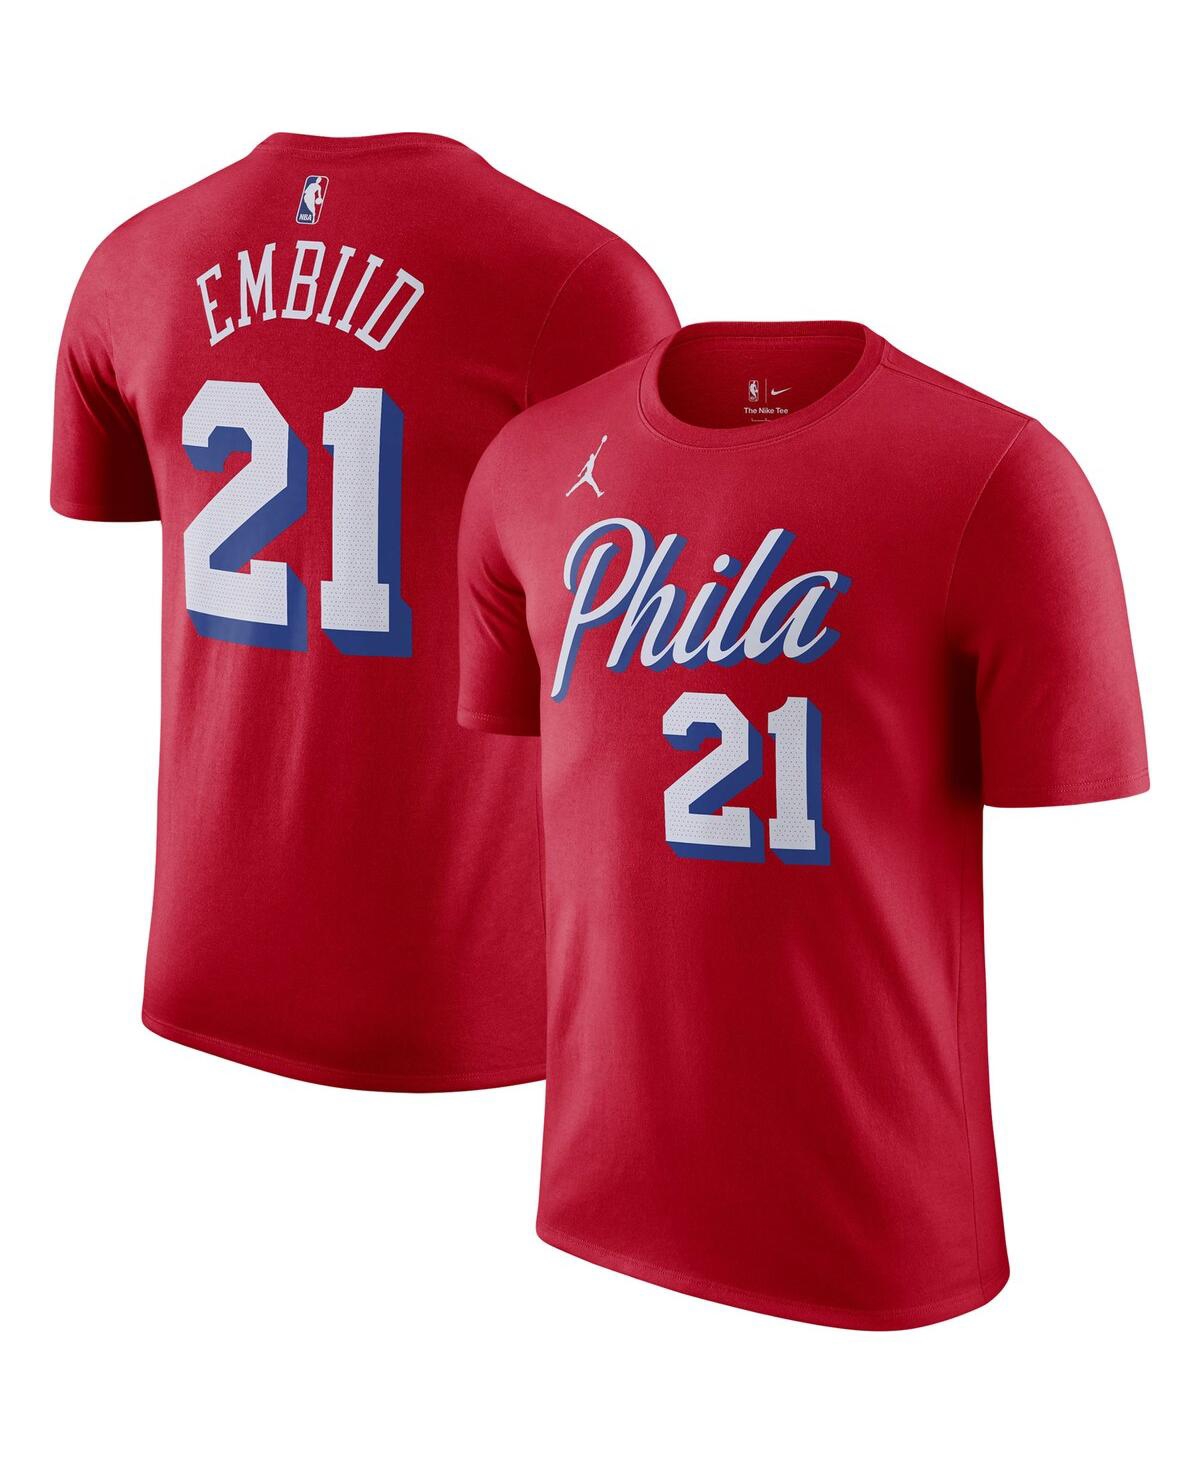 Men's Jordan Joel Embiid Red Philadelphia 76ers 2022/23 Statement Edition Name and Number T-shirt - Red